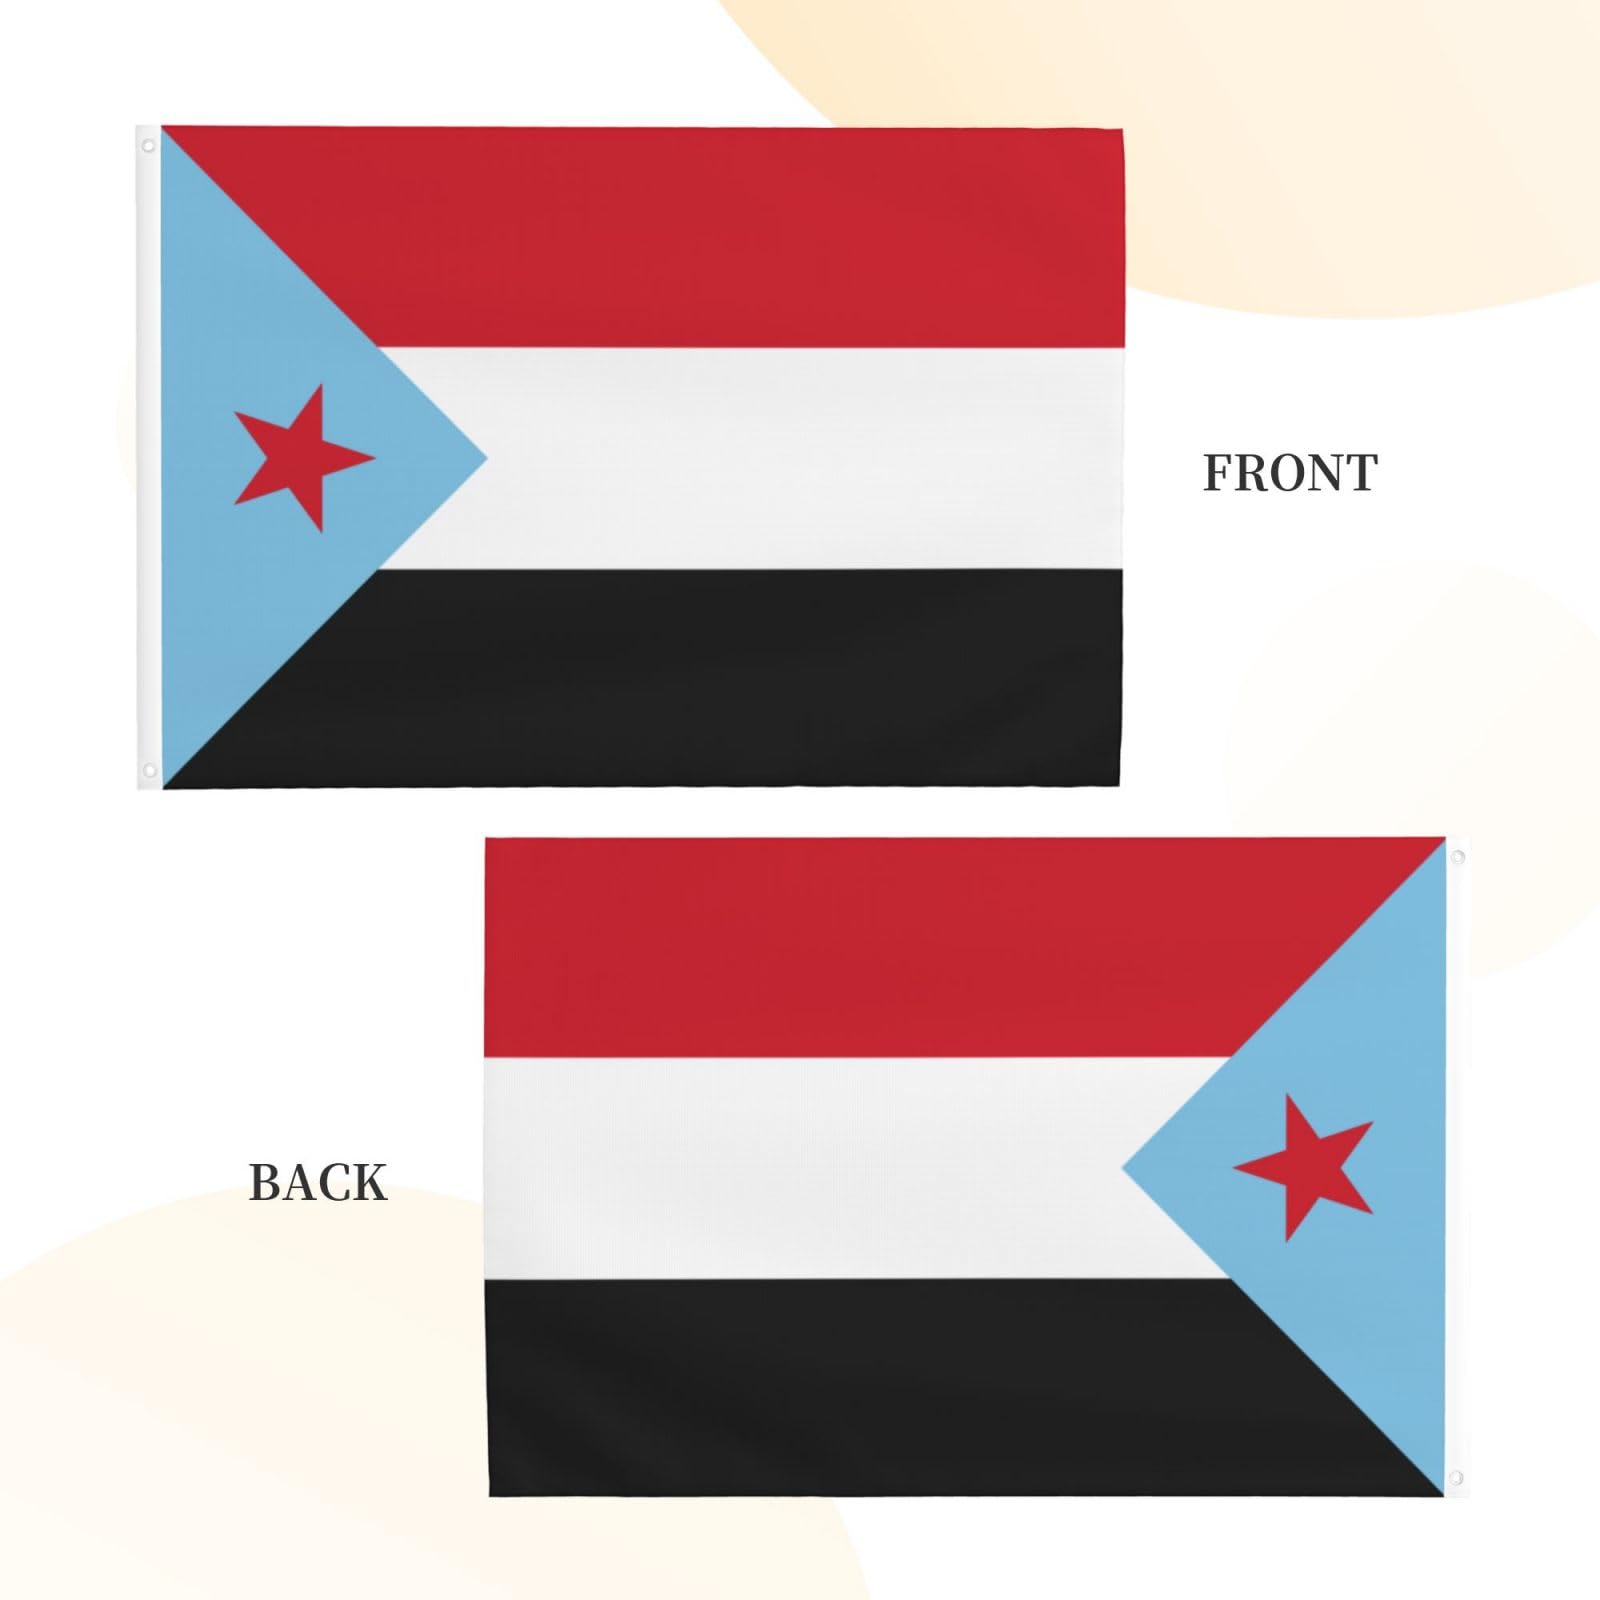 Qizyoqa flag of south yemen flag x ft double sided flags outdoor durable banner home yard decoration flag by flags patio lawn garden